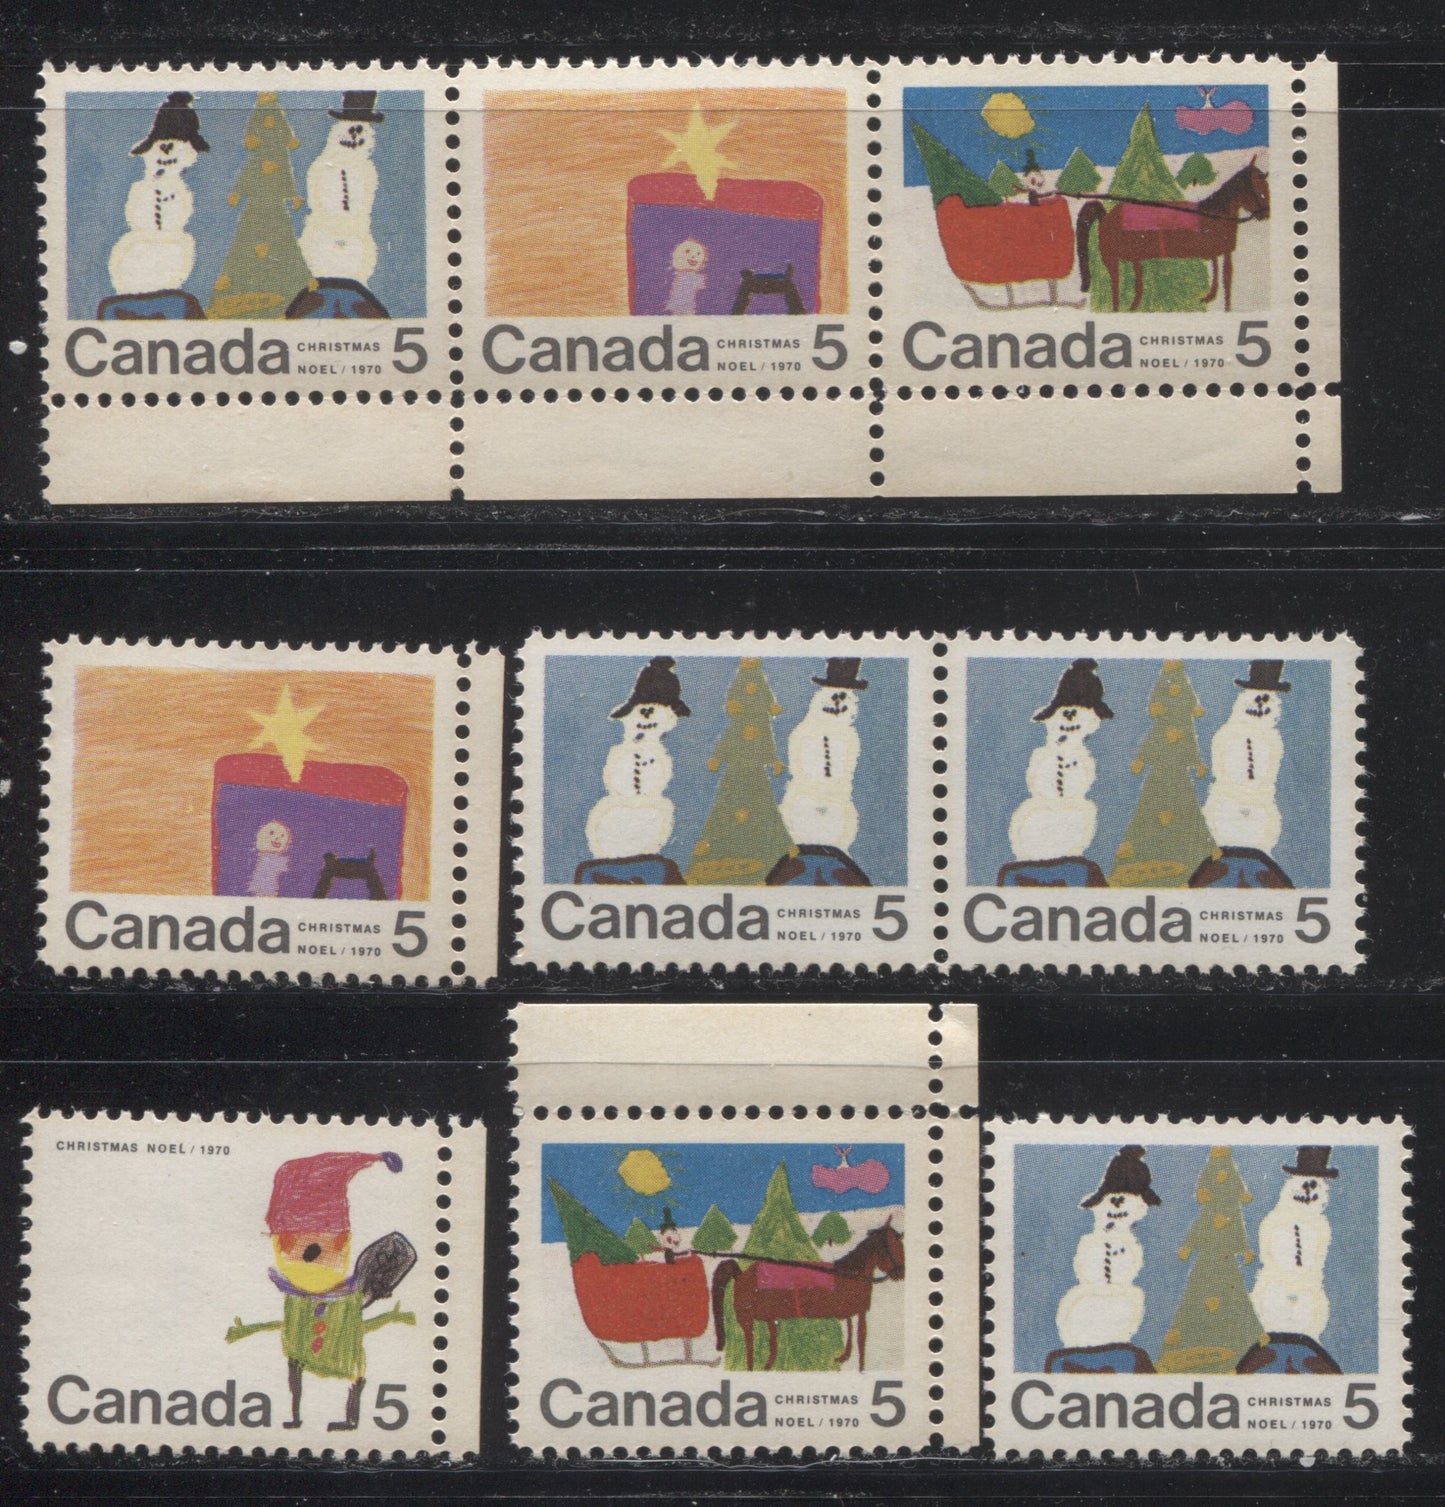 Lot 142 Canada #519-523 5c Multicoloured 1970 Christmas Issue, A Set of 12 Additional Variety Items From One Sheet, Ribbed HB11 Paper, Perf. 11.9 x 11.95